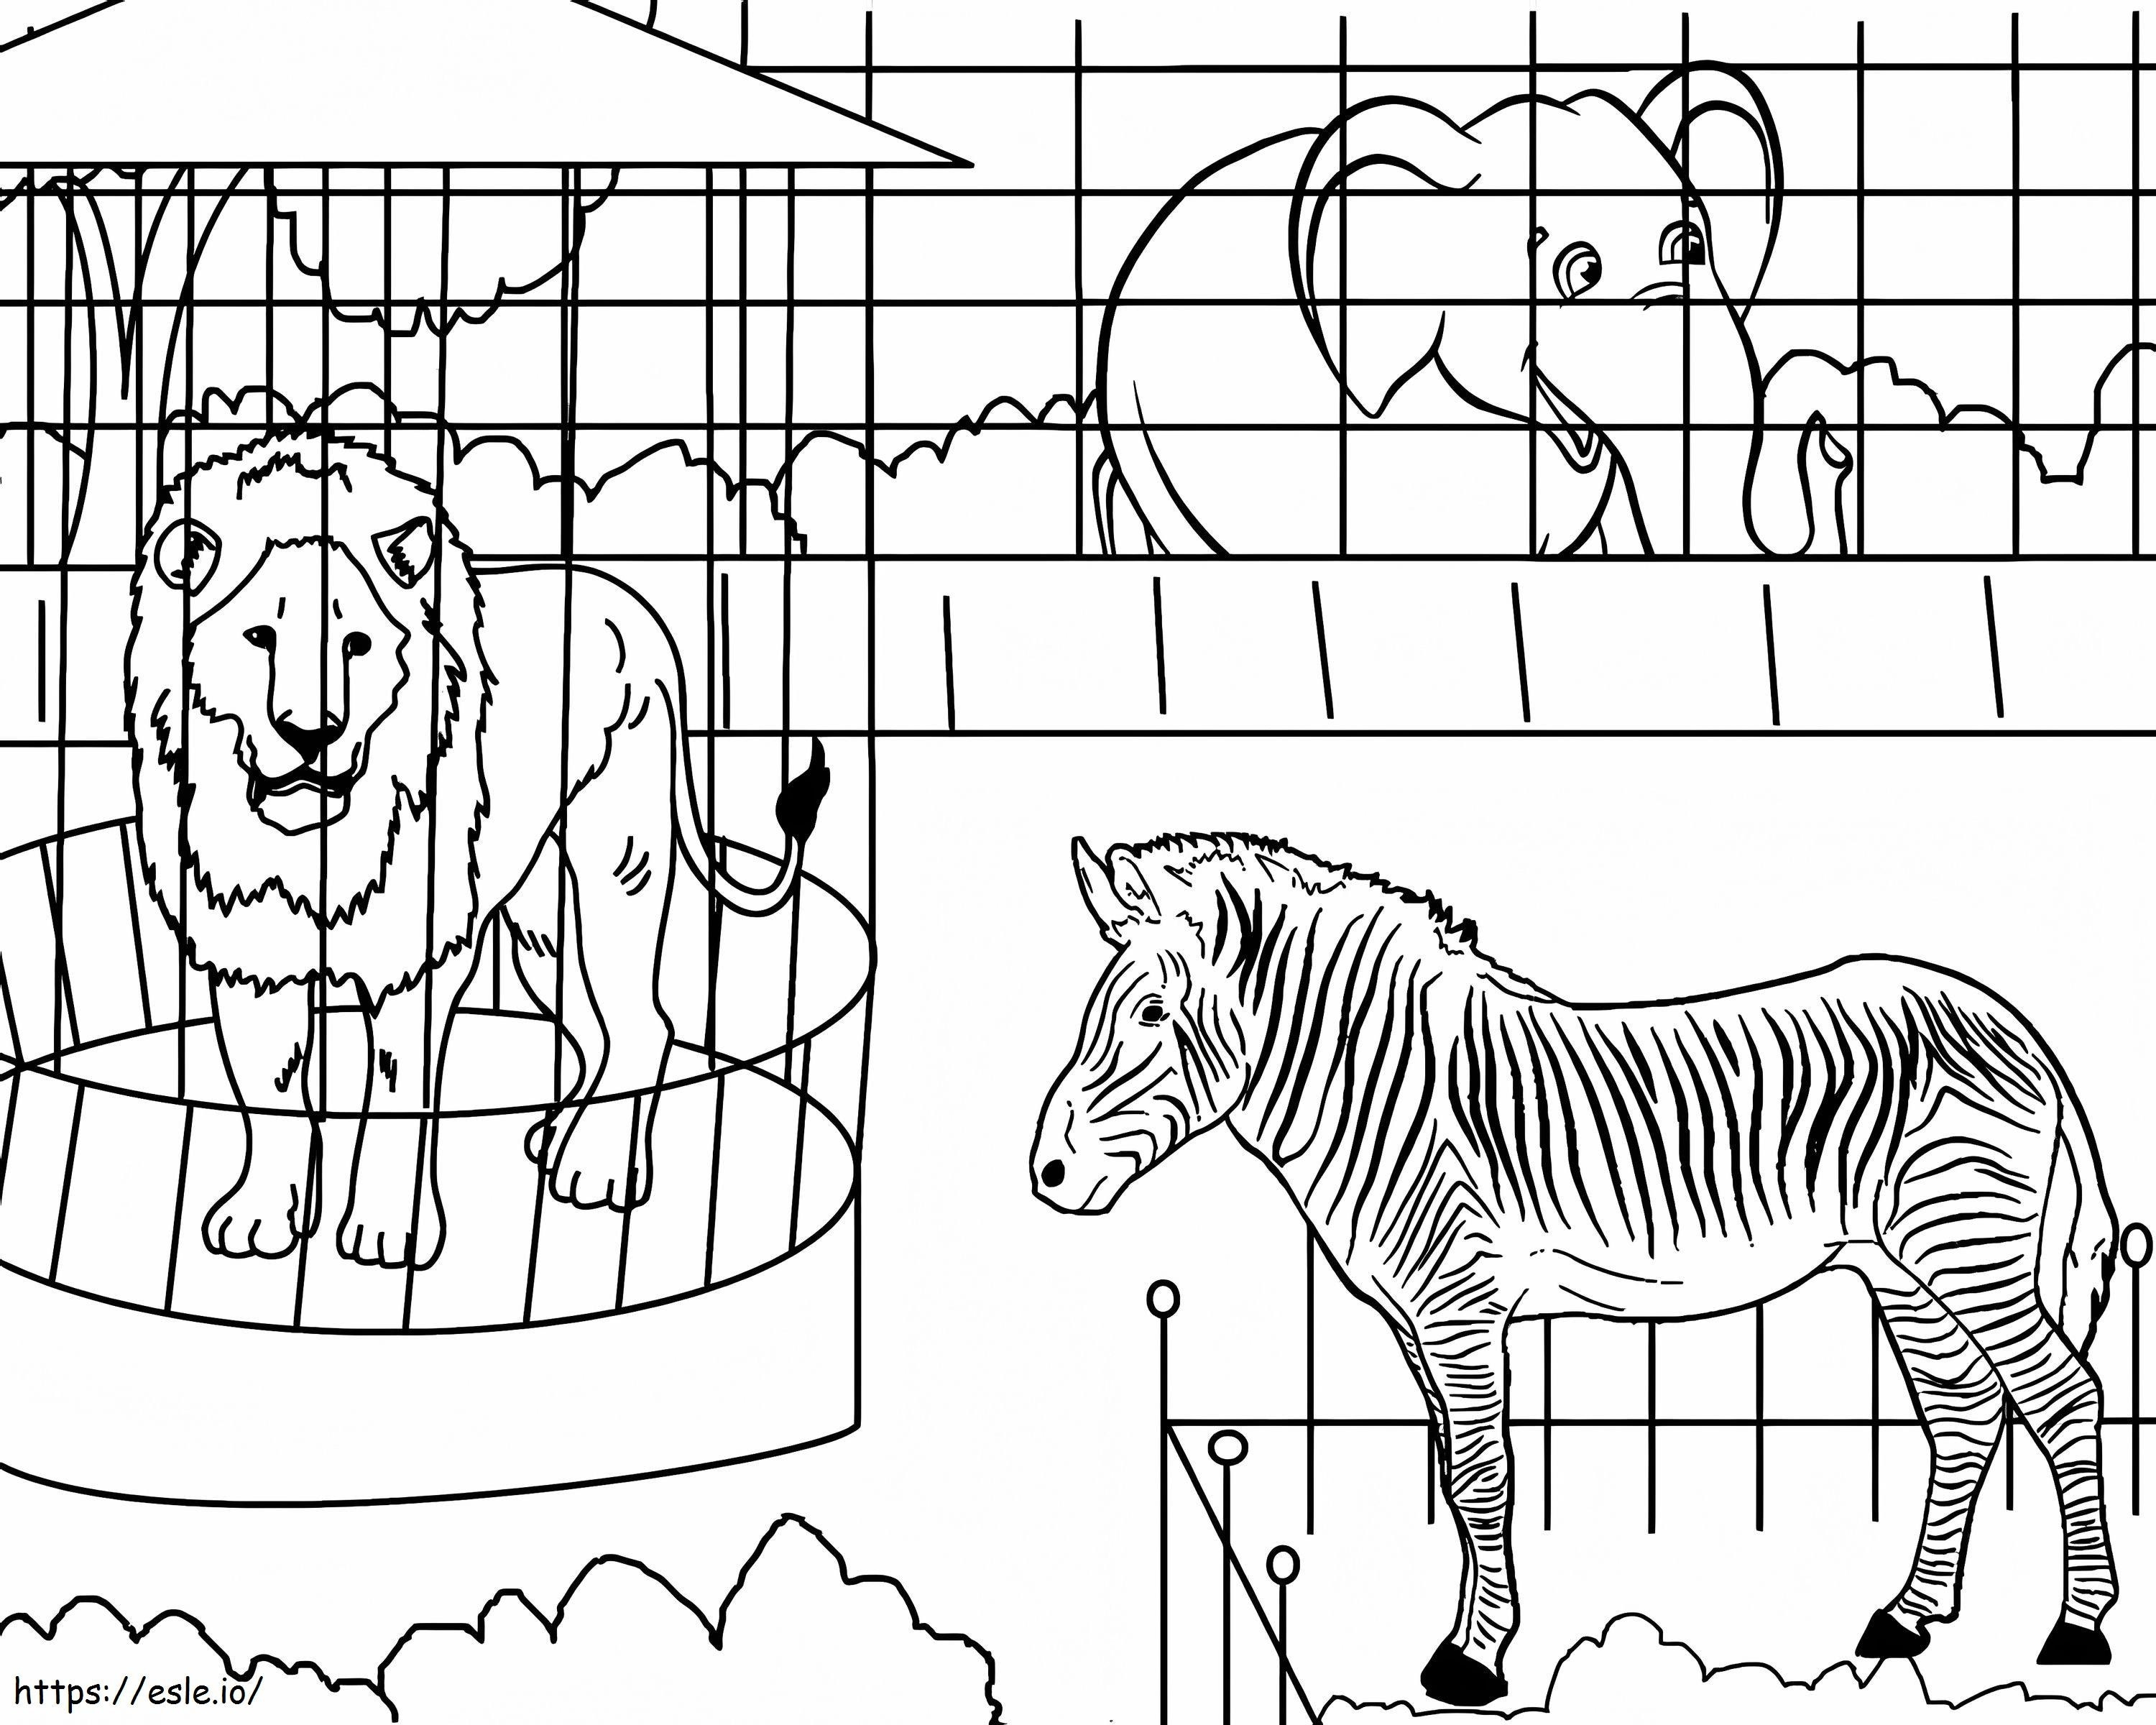 Printable Zoo Animals coloring page